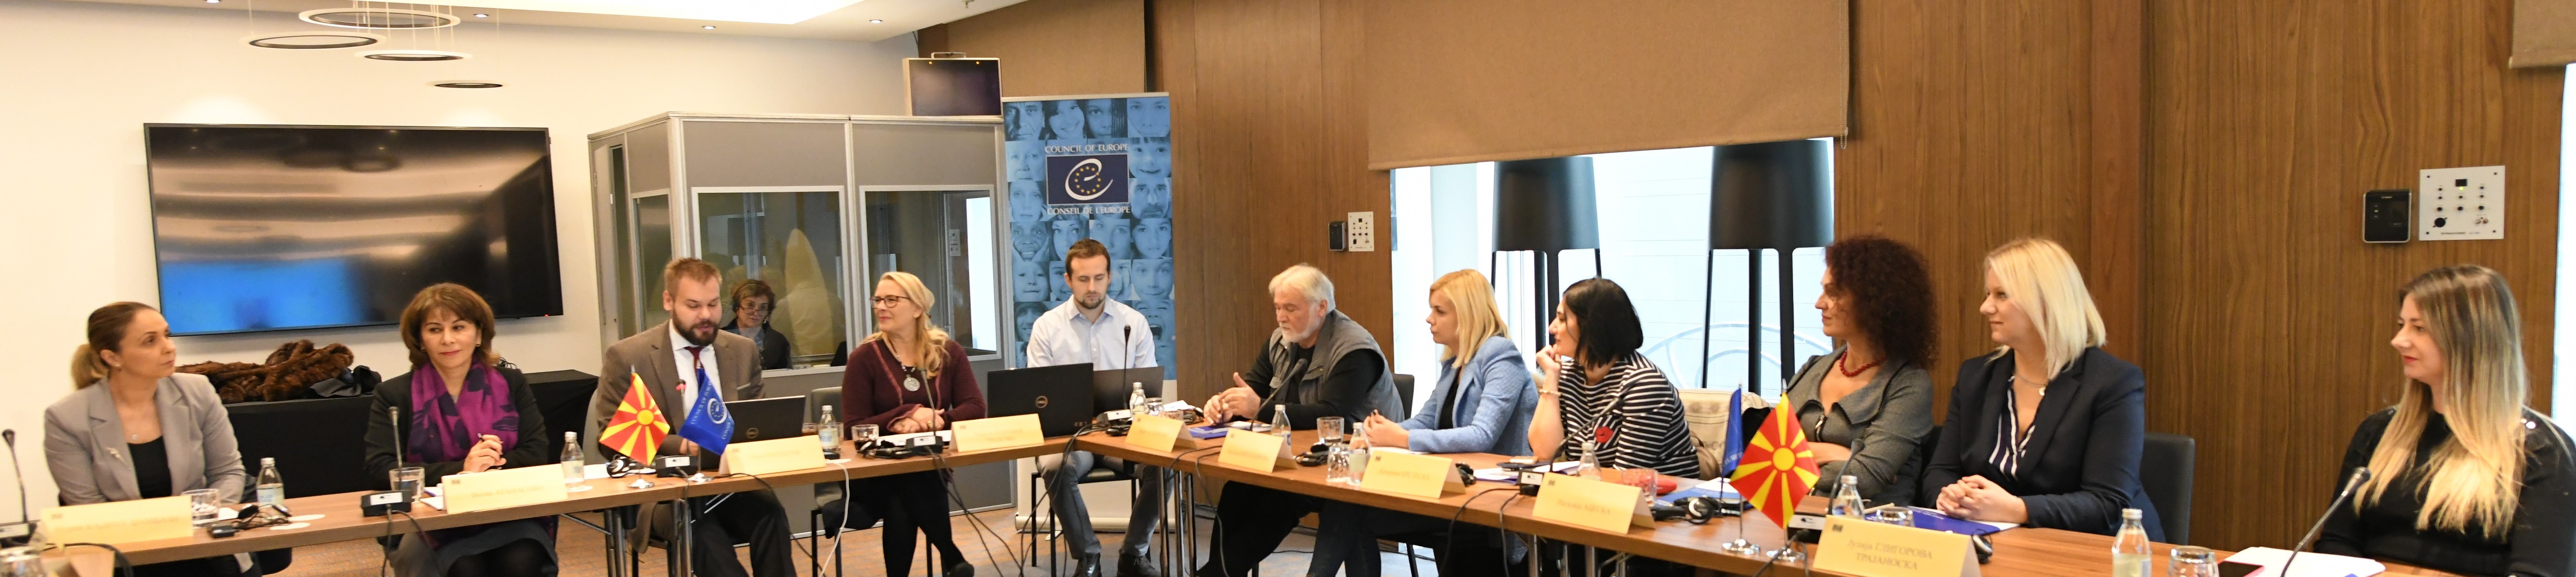 Second Steering Committee meeting of the Quality Education for All – North Macedonia project held in Skopje